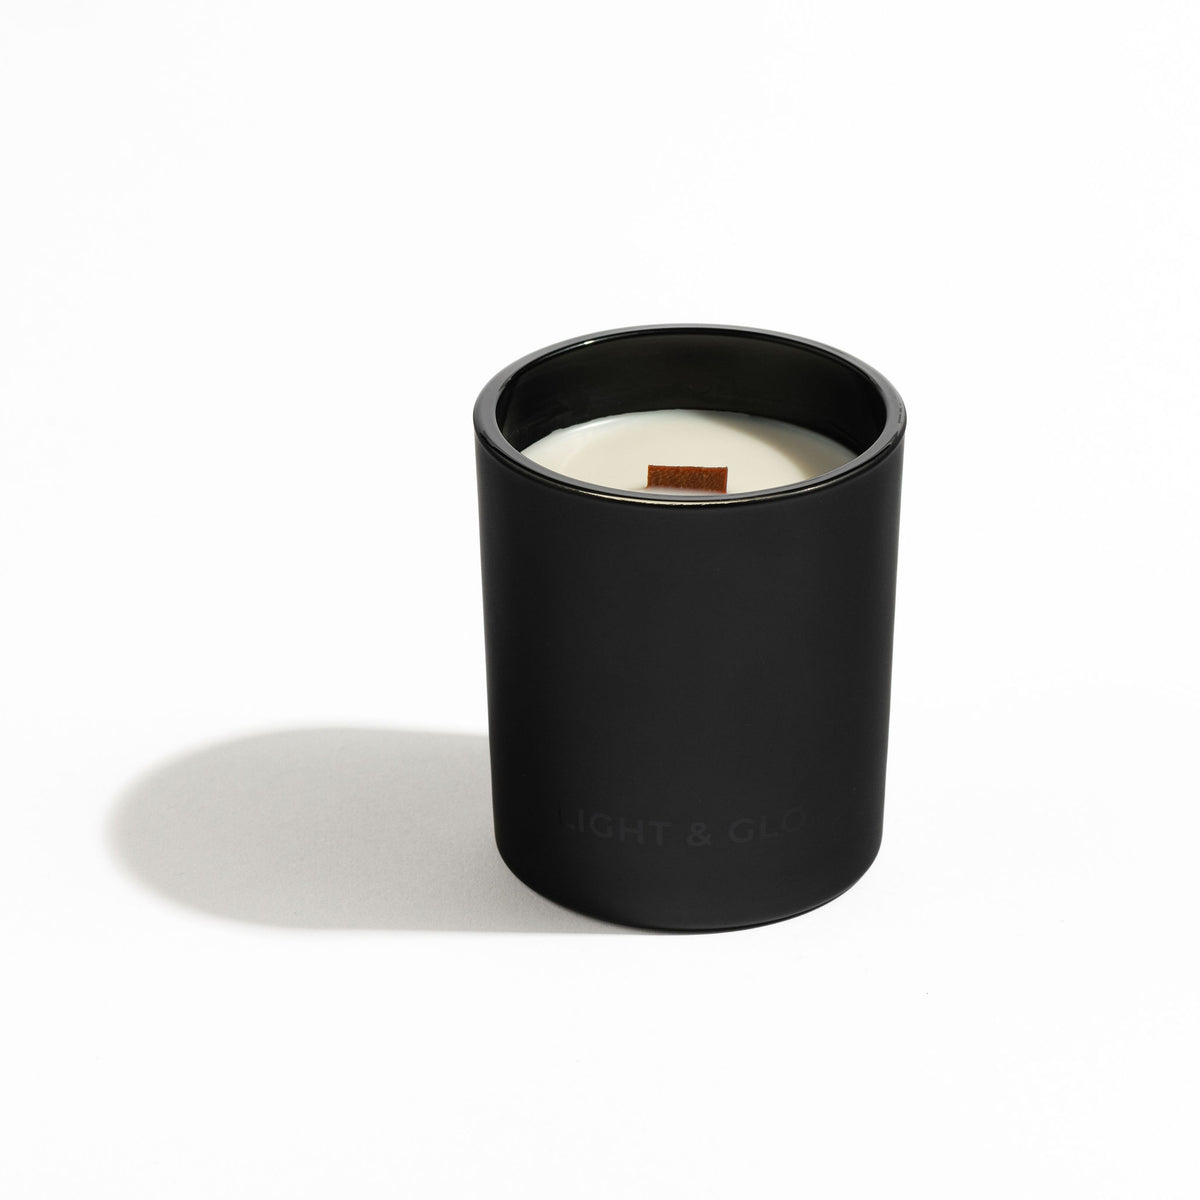 Black Hawk - Noir Large Candle | Luxury Candles &amp; Home Fragrances by Light + Glo